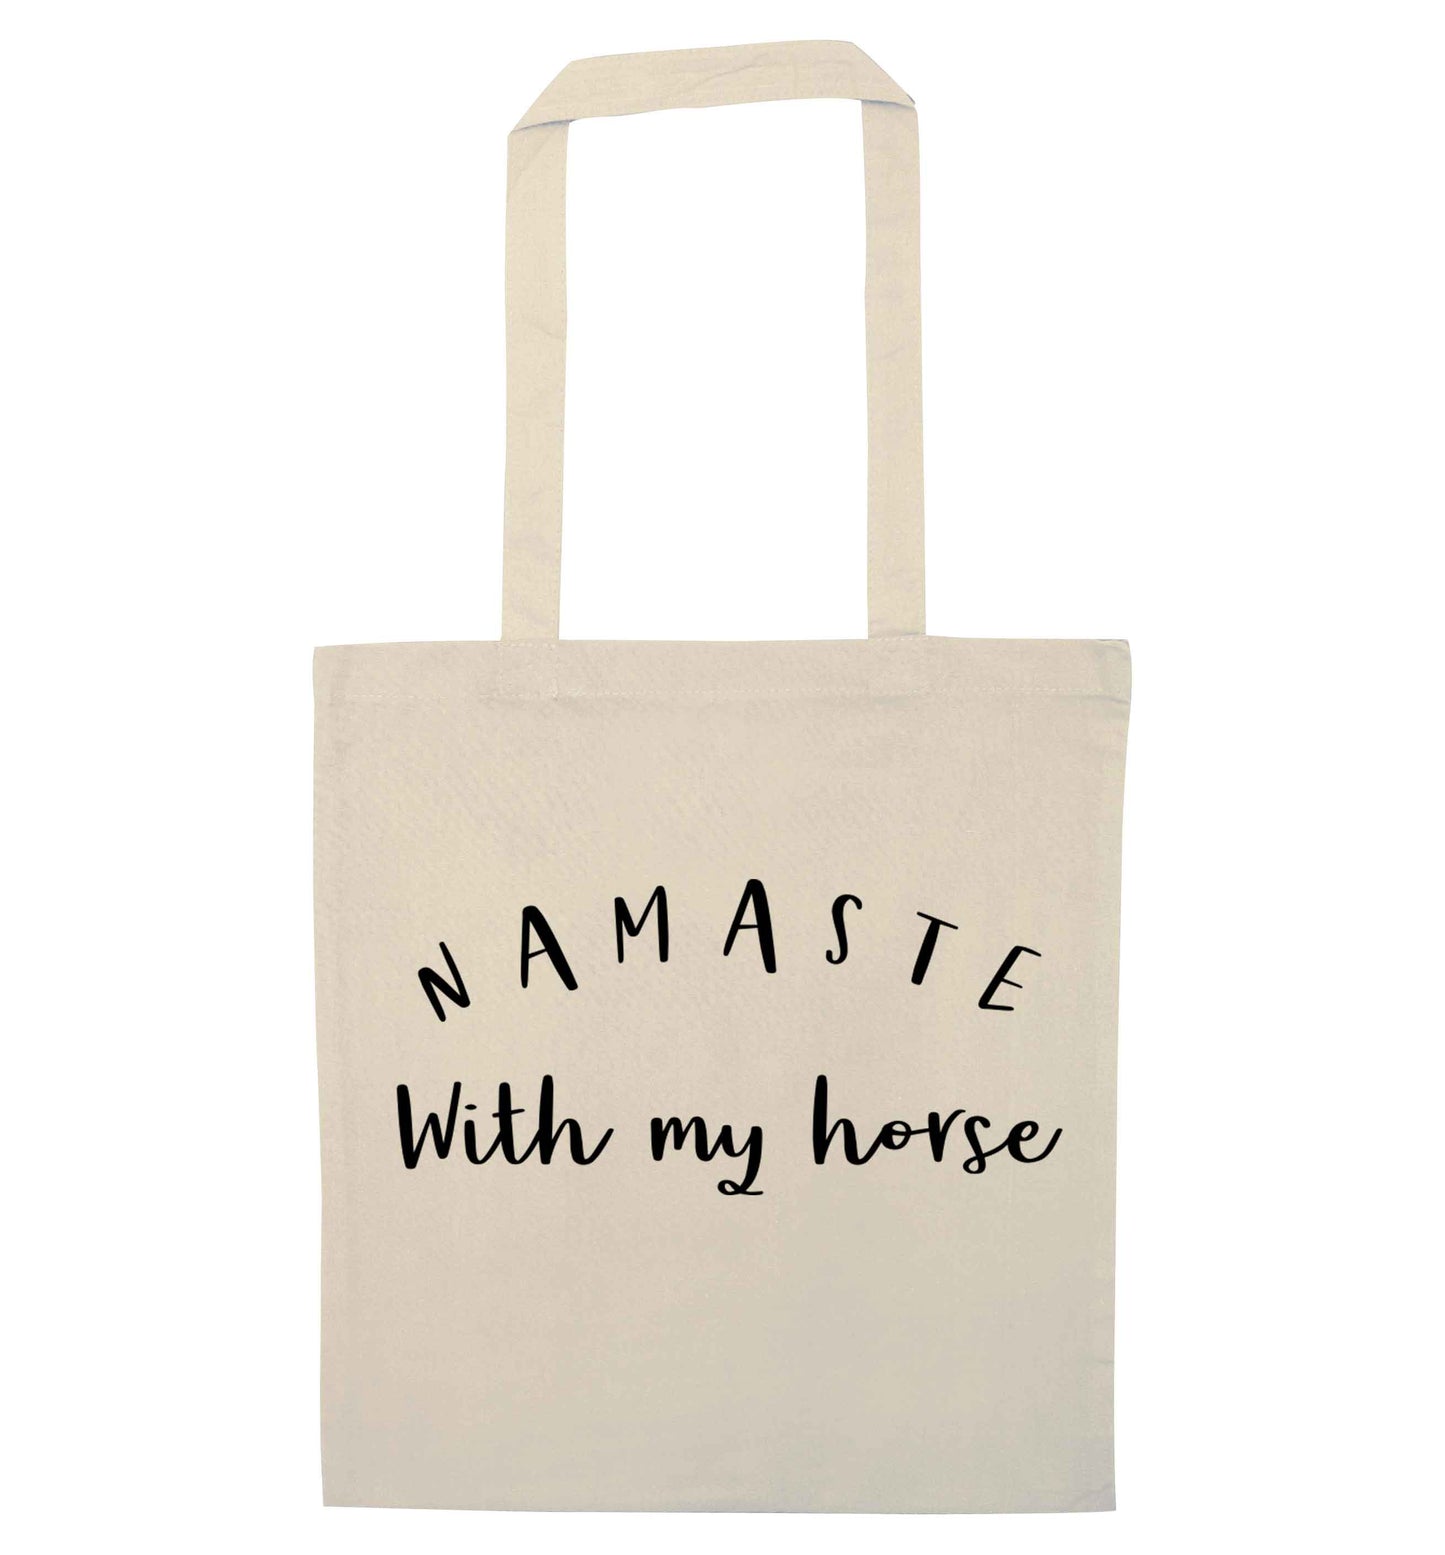 Namaste with my horse natural tote bag